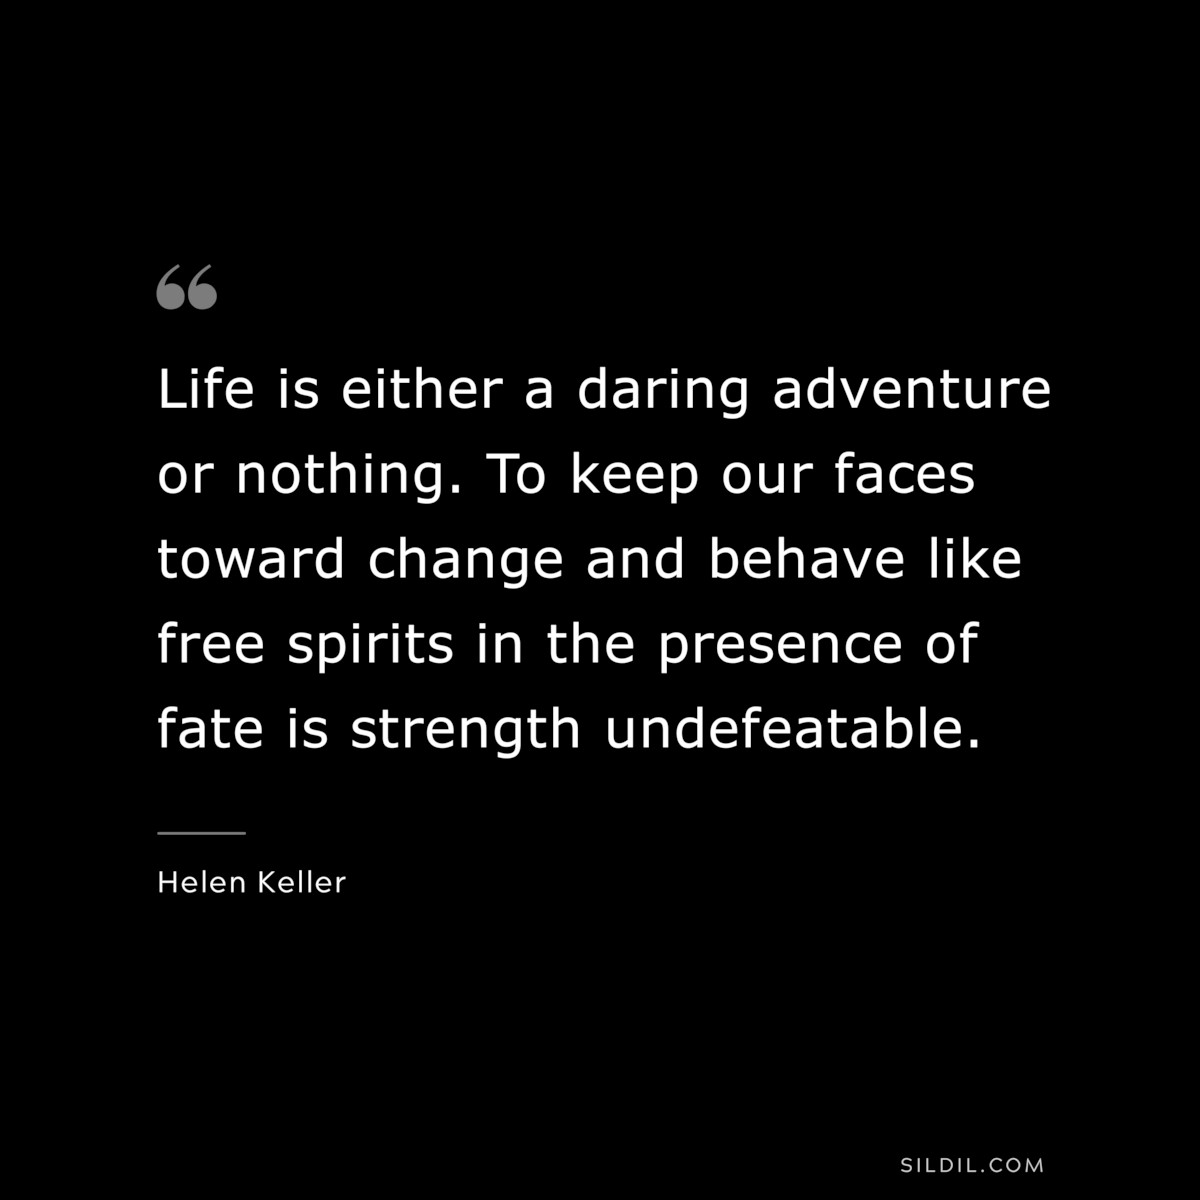 Life is either a daring adventure or nothing. To keep our faces toward change and behave like free spirits in the presence of fate is strength undefeatable. ― Helen Keller